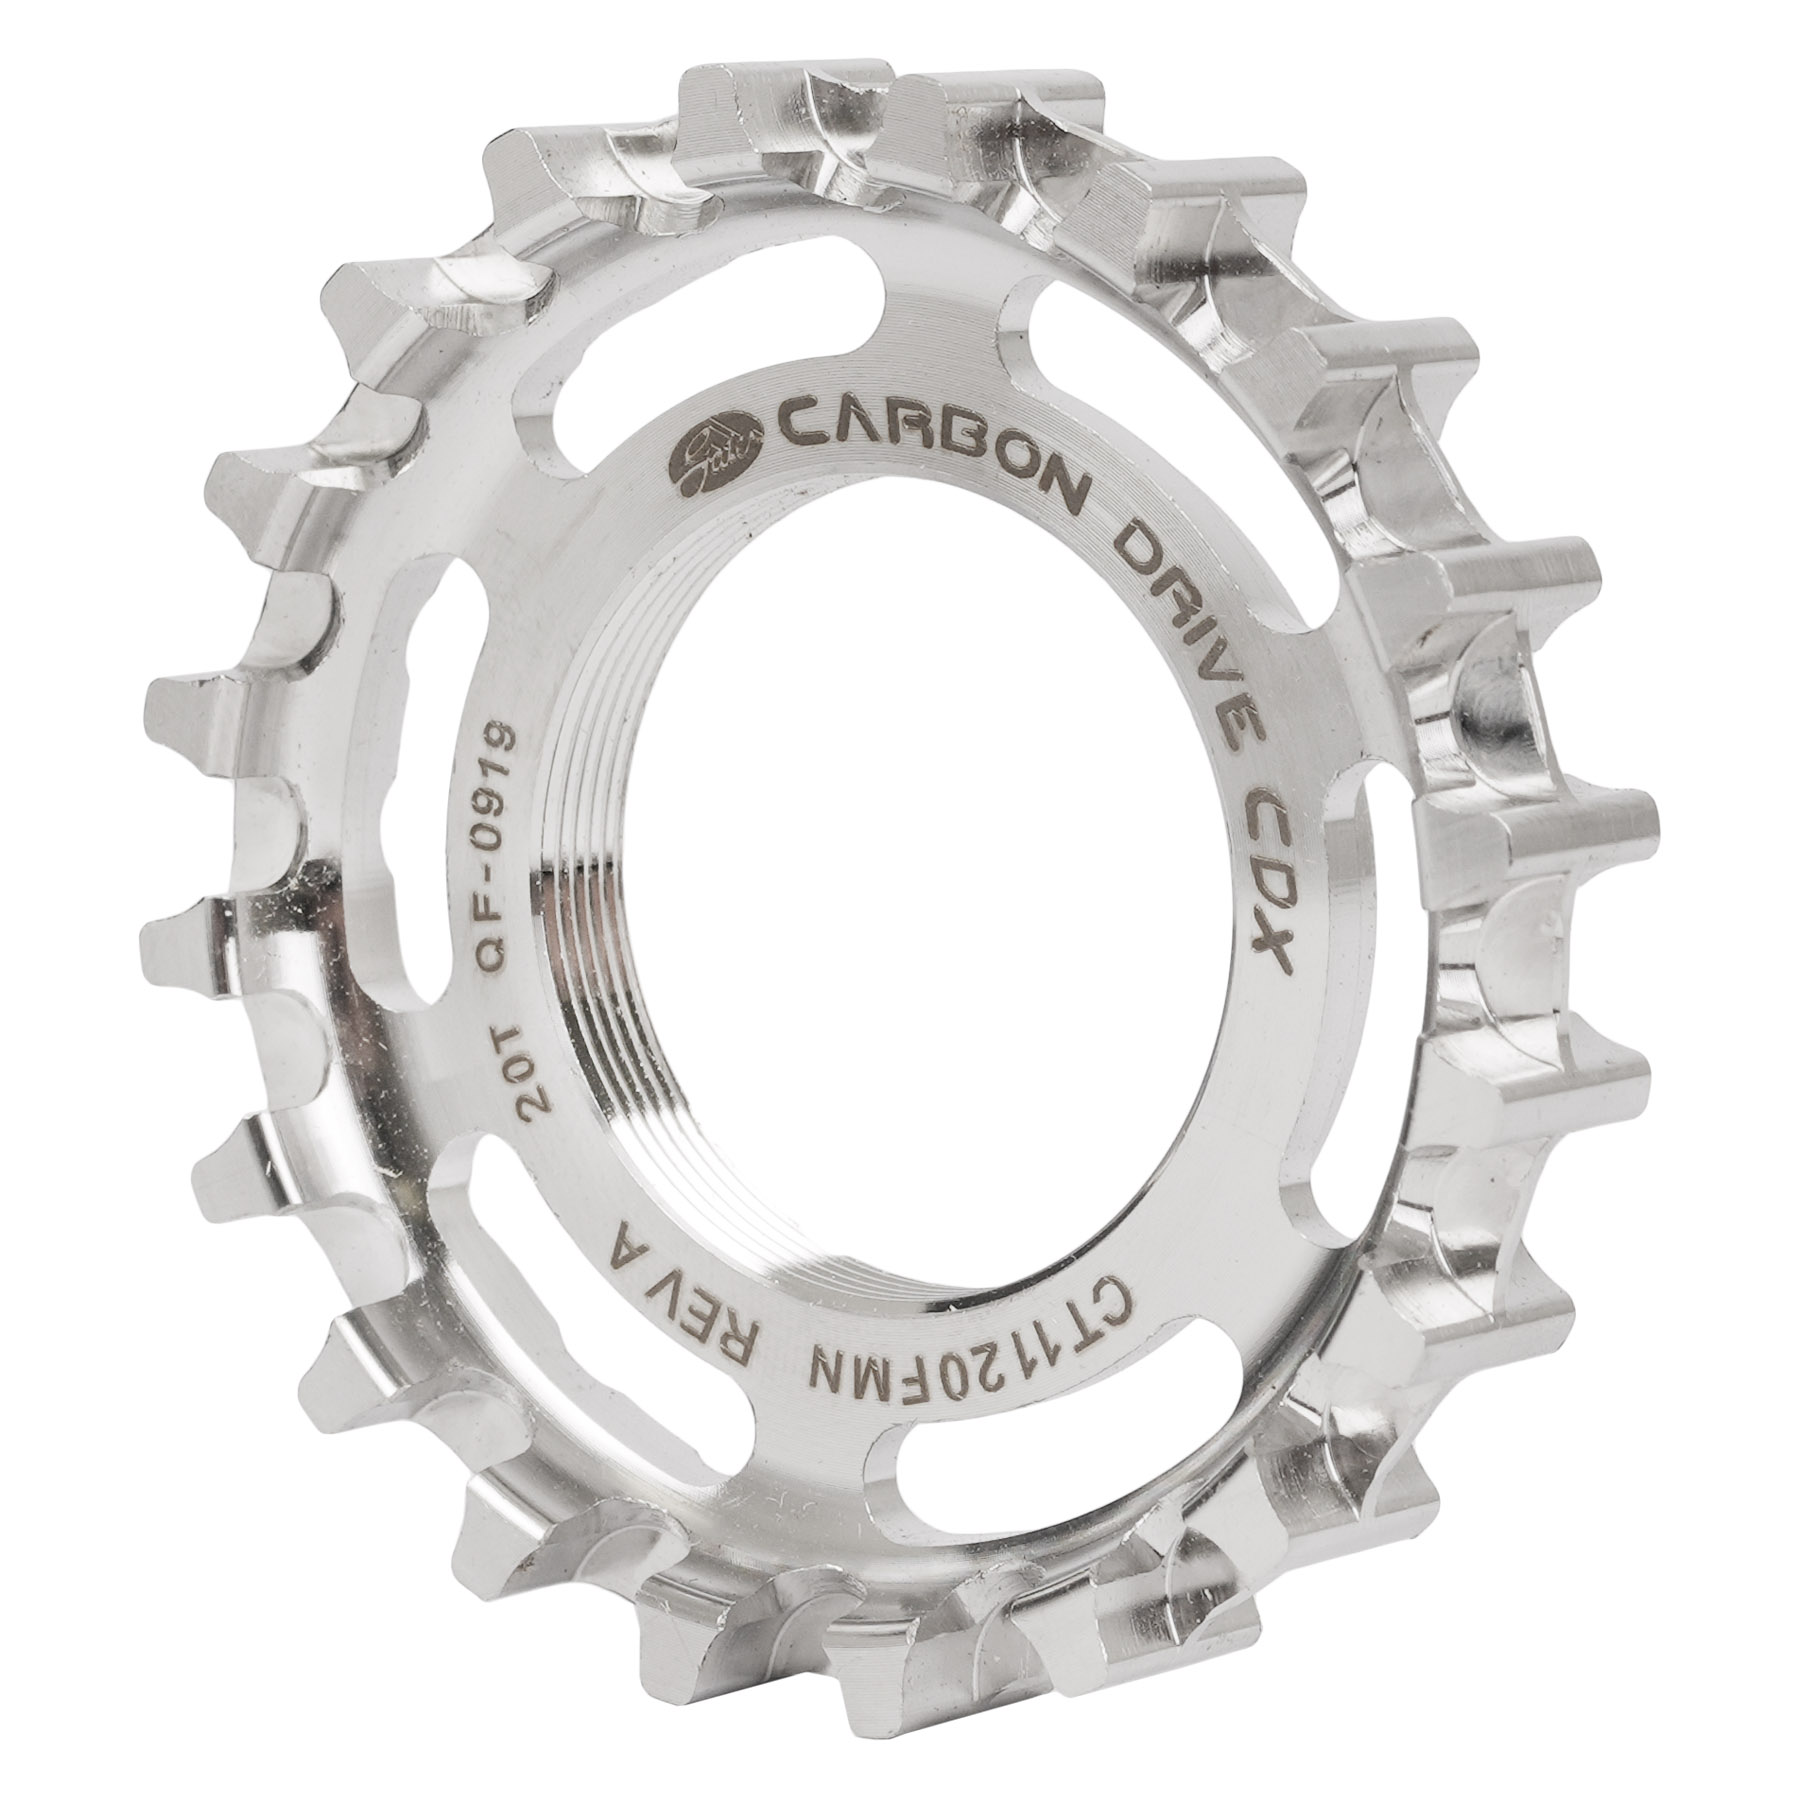 Productfoto van Gates Carbon Drive CDX Centertrack Sprocket - Rear | Thread-on / Fixie 34,8 mm - stainless steel